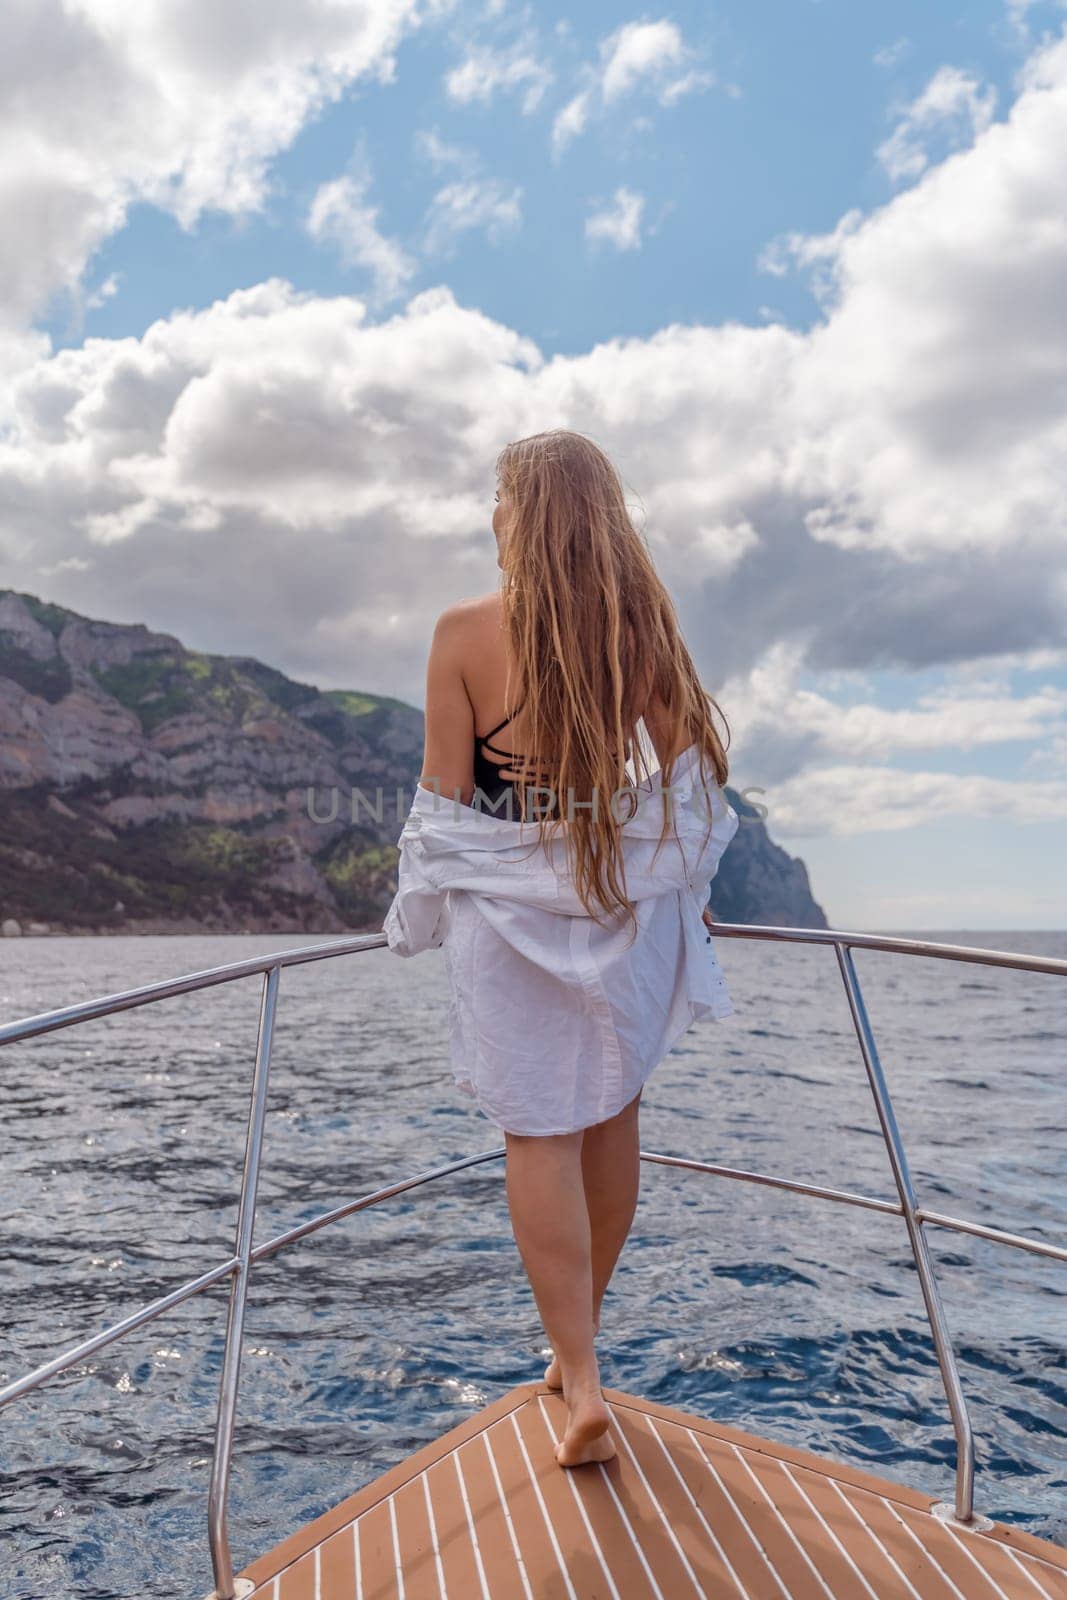 Woman on a yacht. Happy model in a swimsuit posing on a yacht against a blue sky with clouds and mountains.